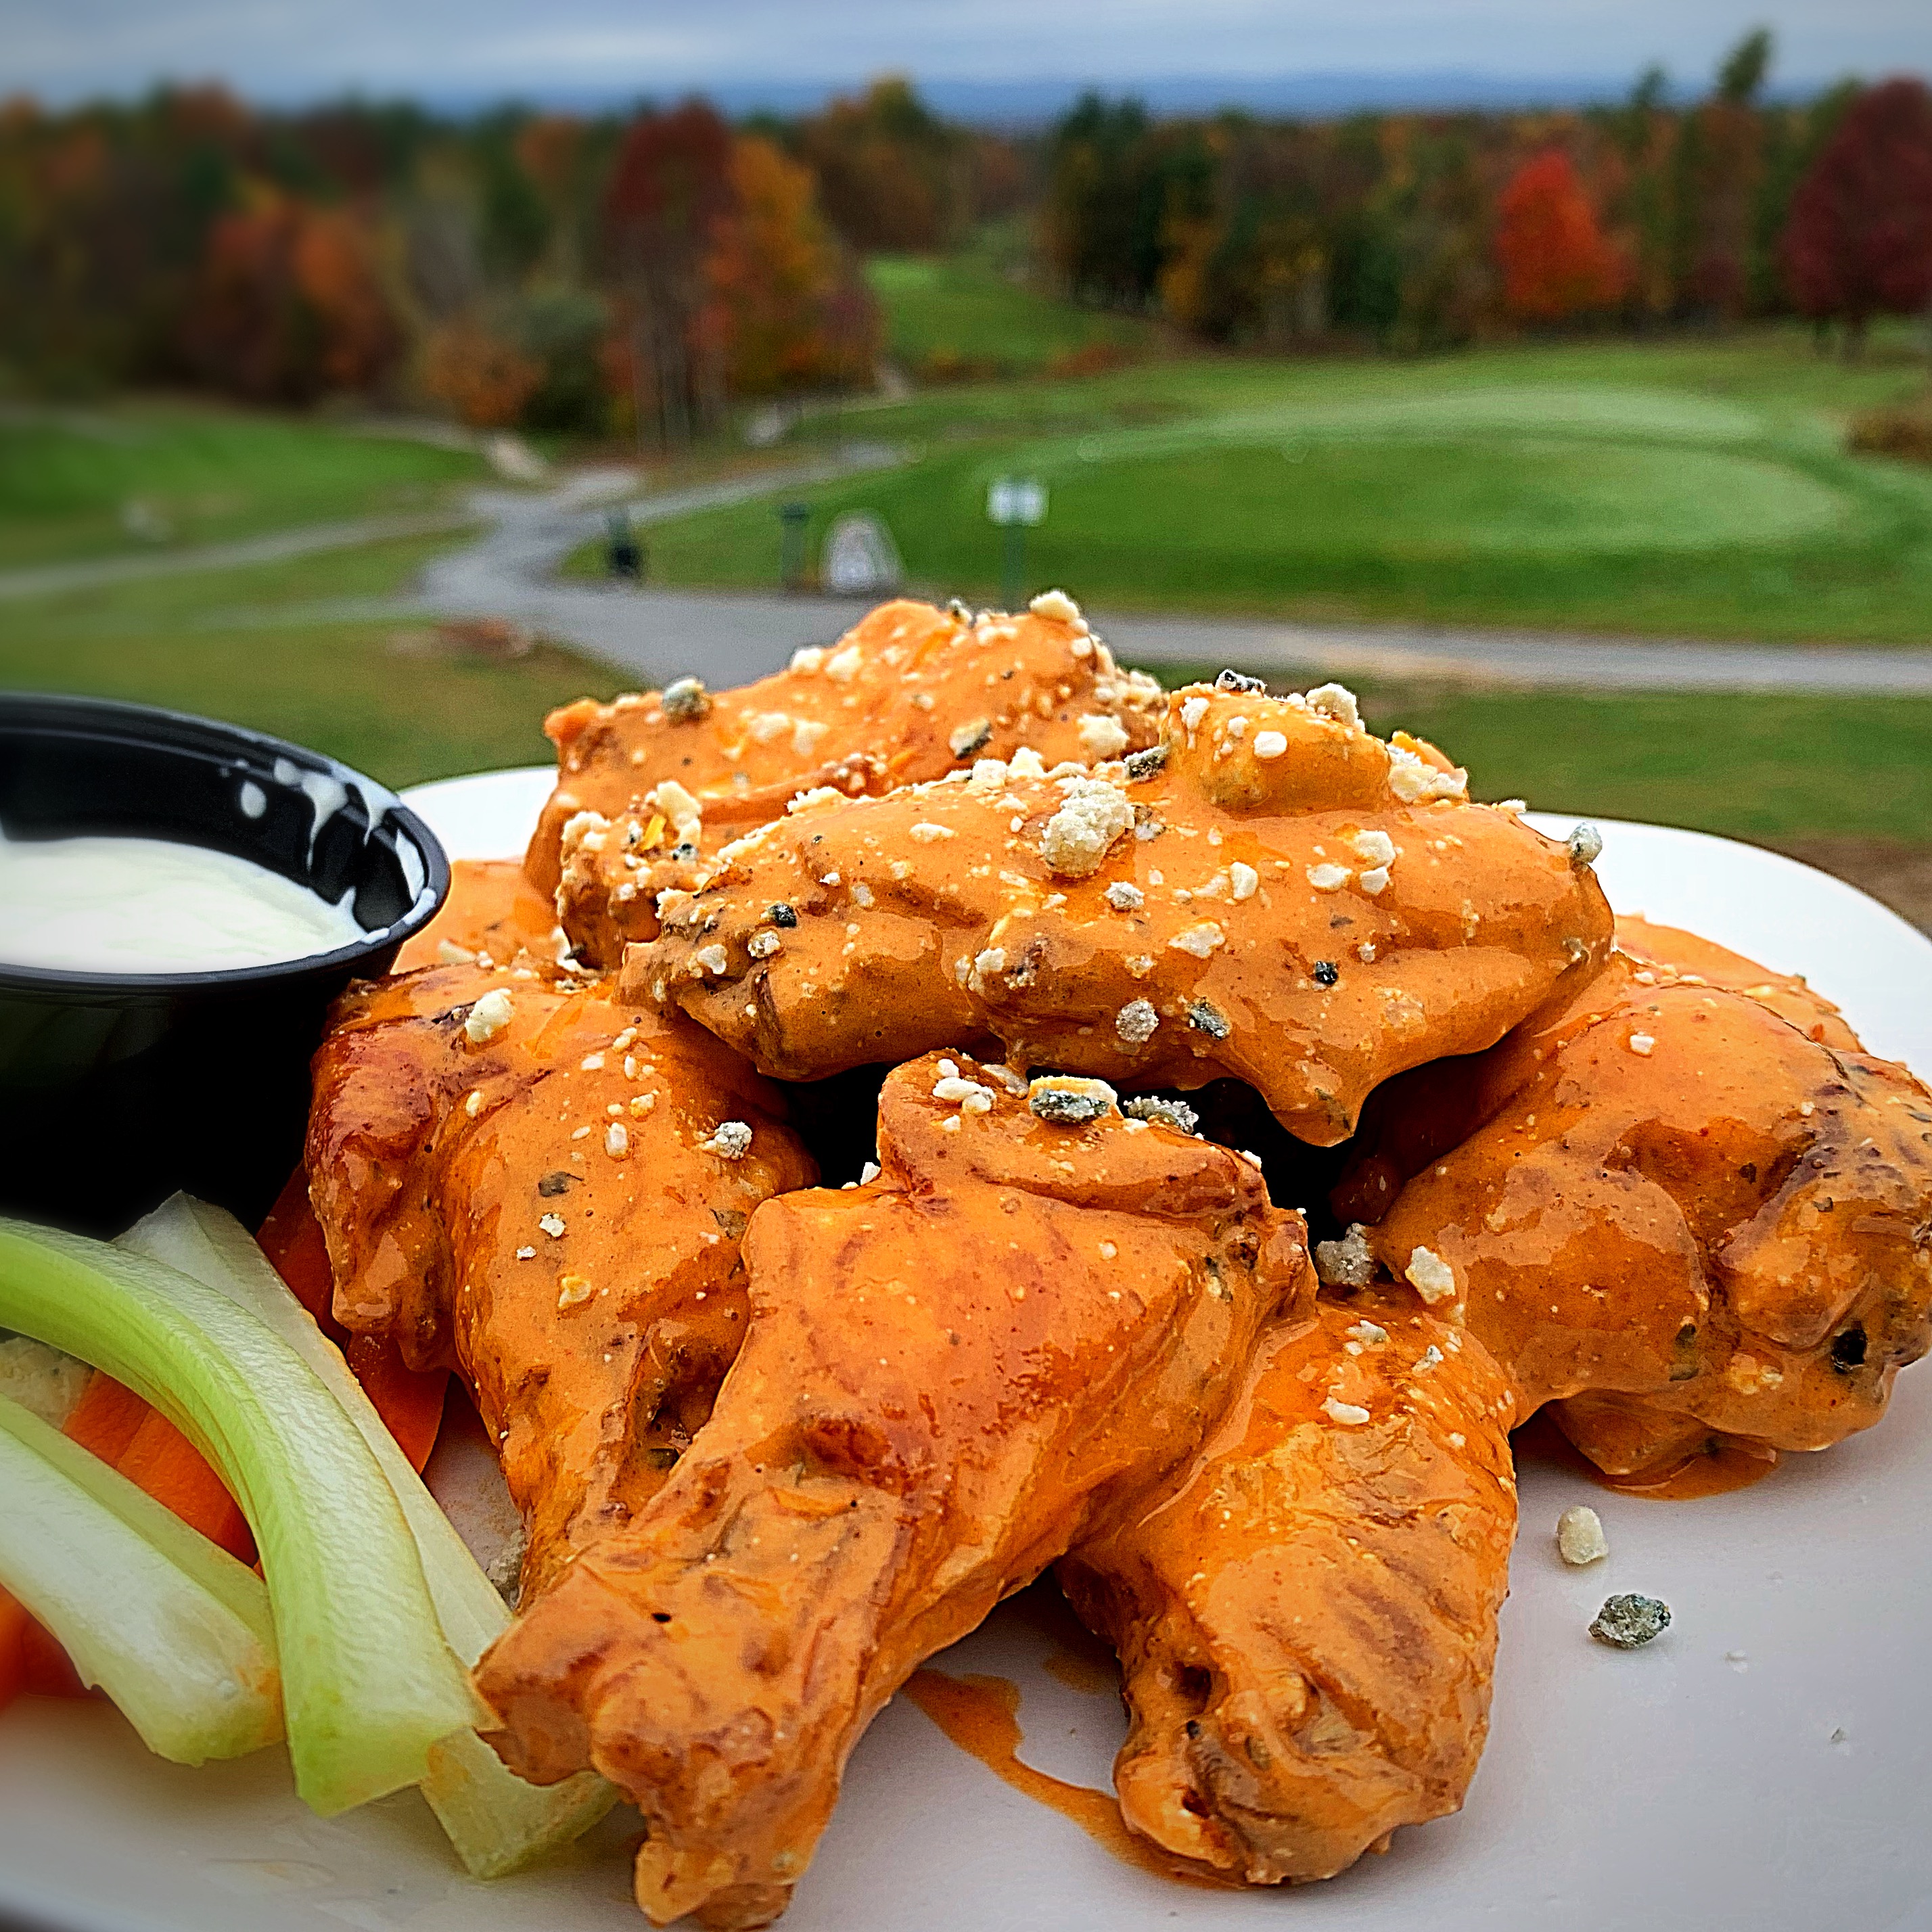 Chicken wings on a white plate with the golf course in the background.